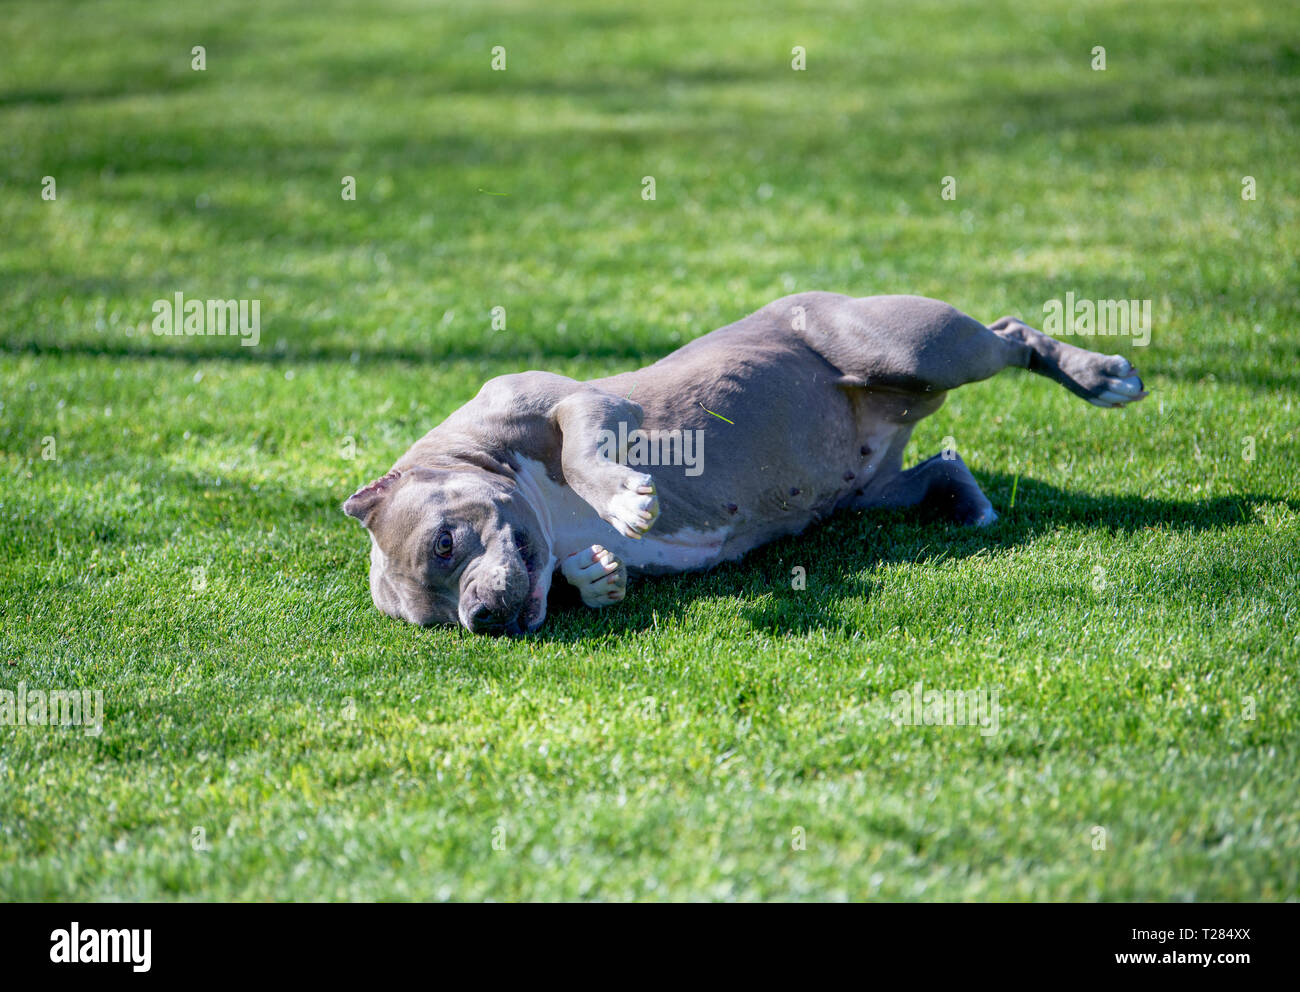 Dog enjoying a roll in the grass Stock Photo